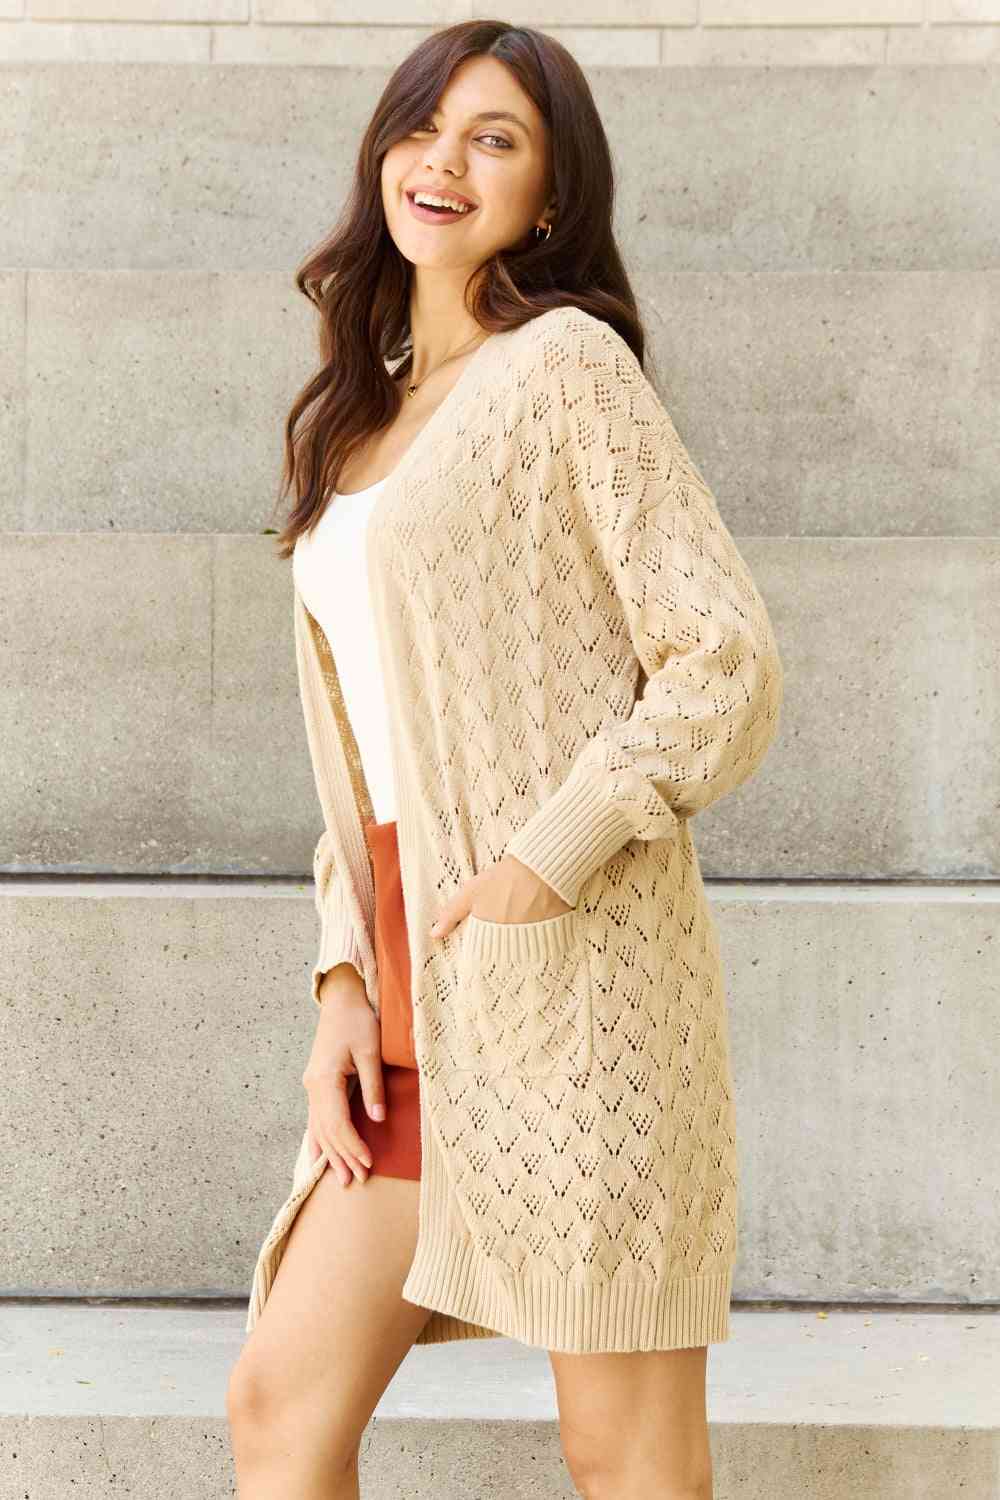 Breezy Days Full Size Open Front Sweater Cardigan - Sweaters - Shirts & Tops - 8 - 2024